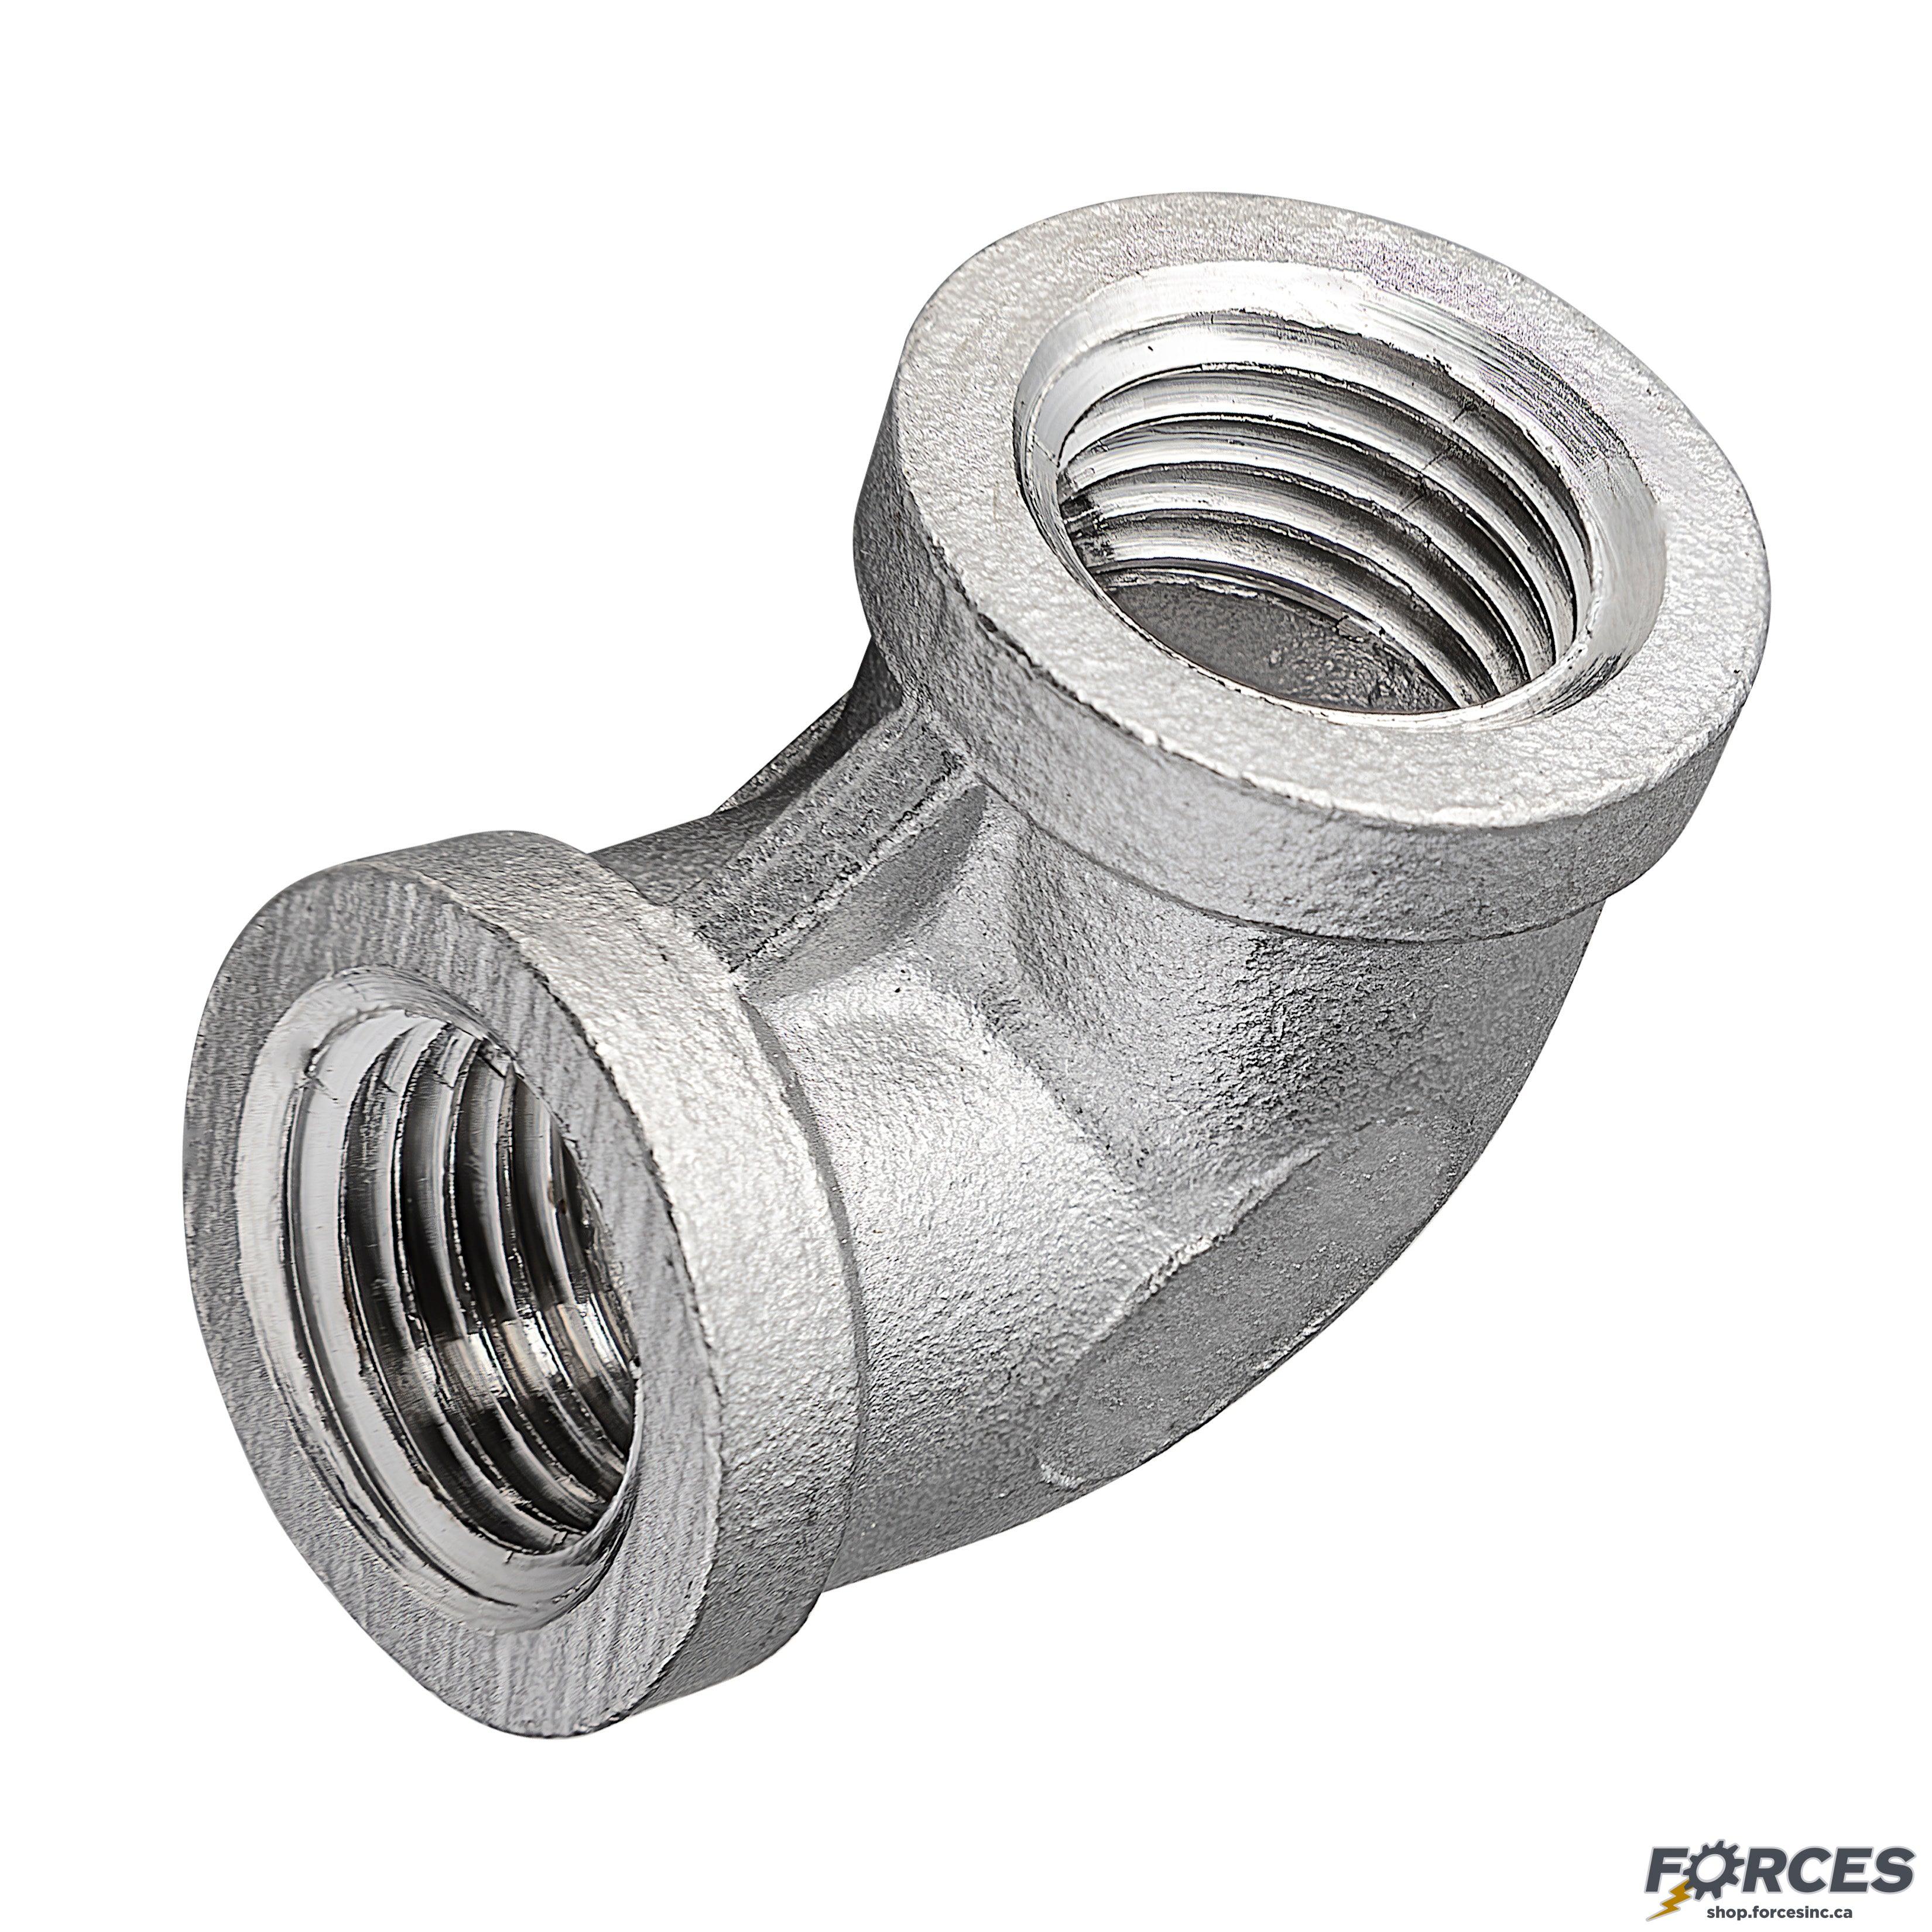 1/4" Elbow 90° NPT #150 - Stainless Steel 304 - Forces Inc